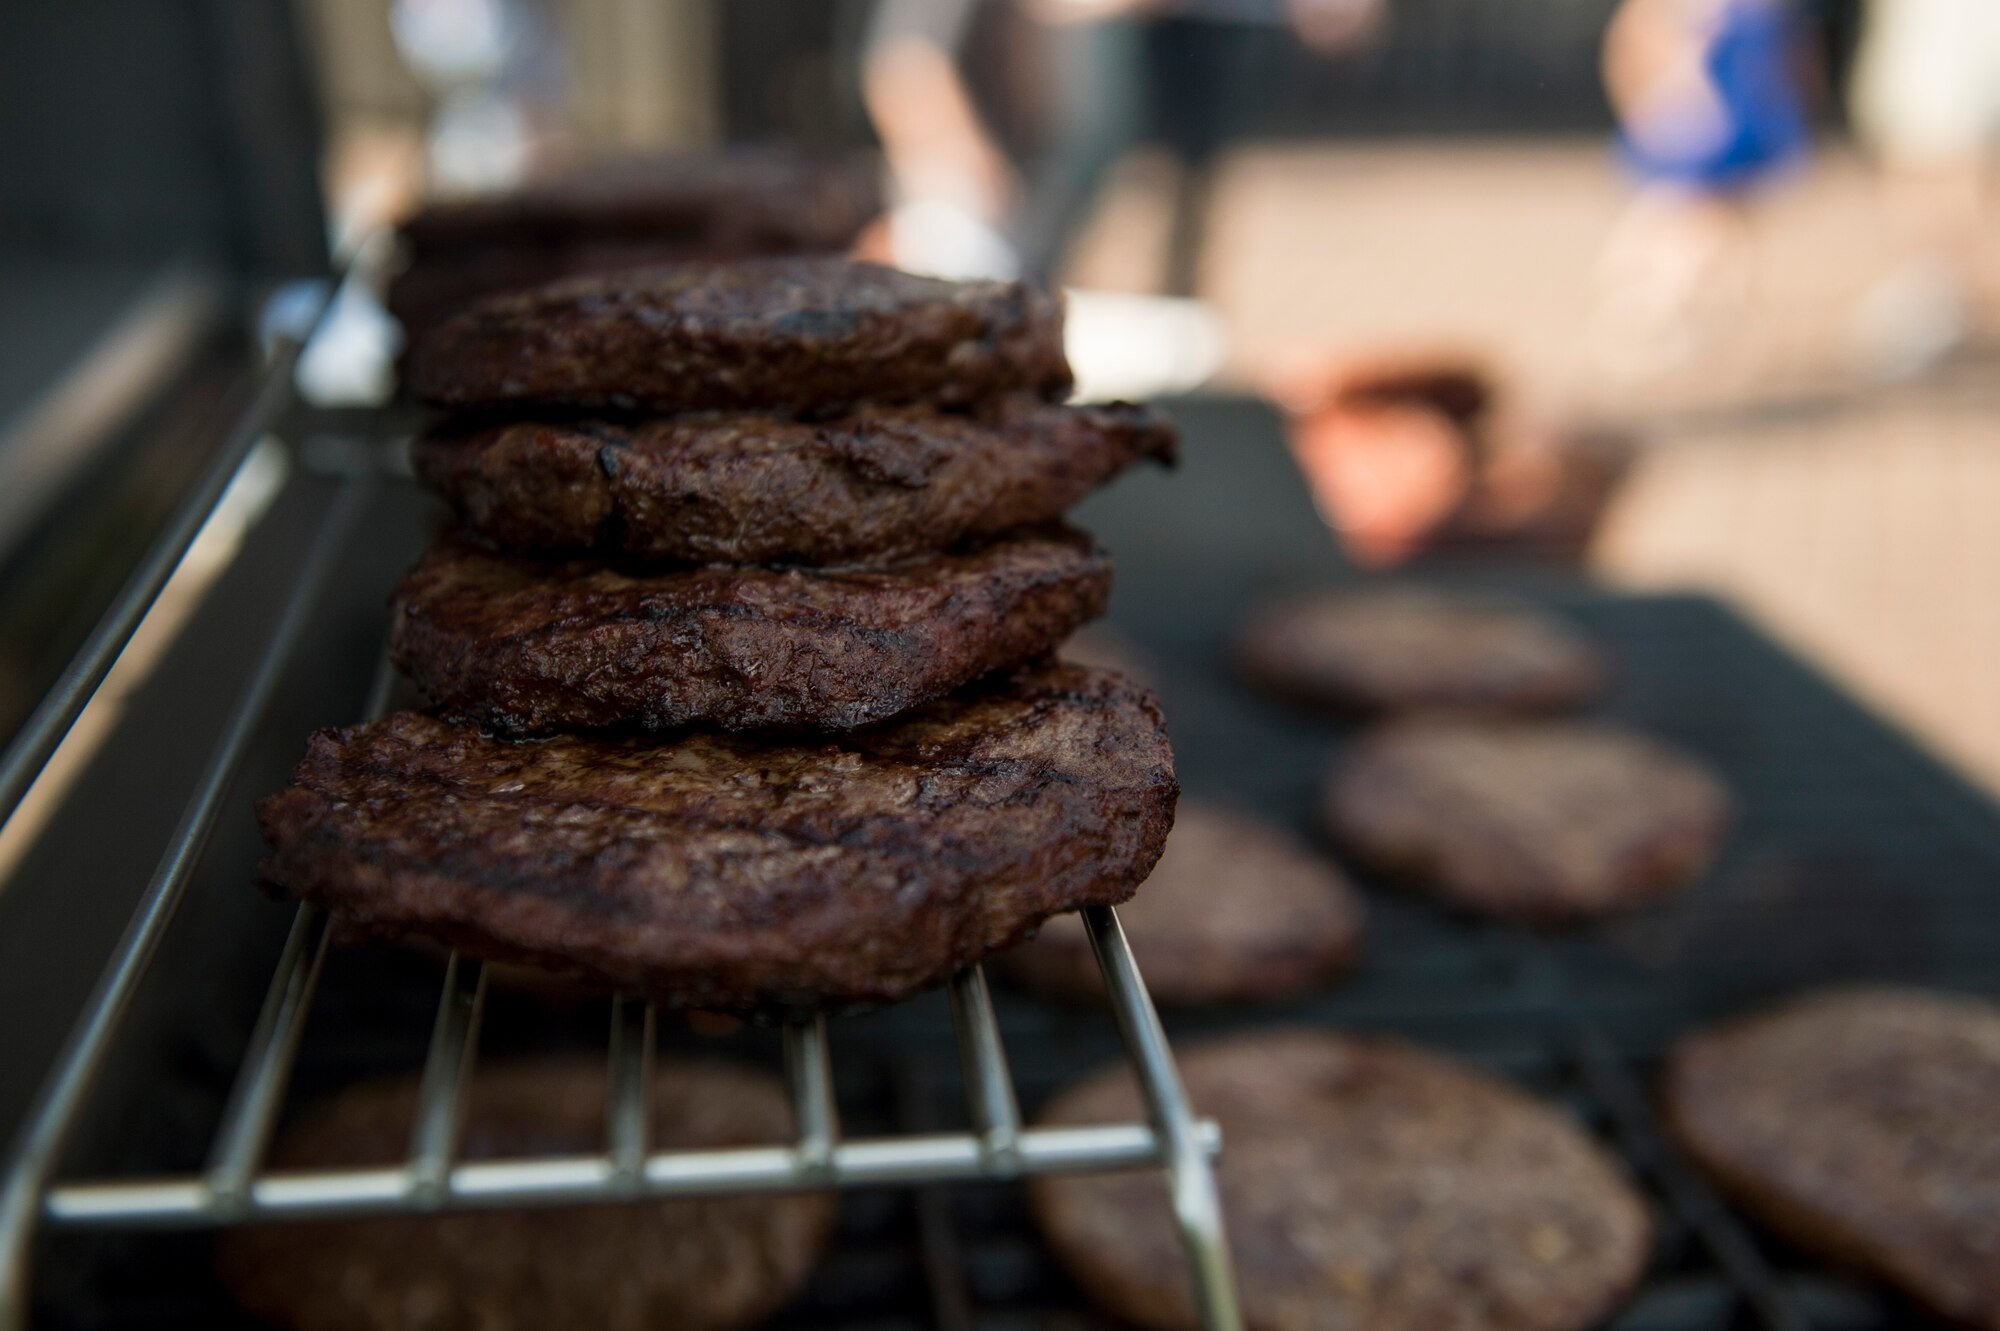 Hamburgers sit on a grill during the Adopt an Airman Program barbecue Sept. 5, 2014, at Spangdahlem Air Base, Germany. More than 55 German families and 20 Airmen signed up for the program, which allows a way for German and Airmen reach out to each other and share cultures. (U.S. Air Force photo by Senior Airman Rusty Frank/Released)